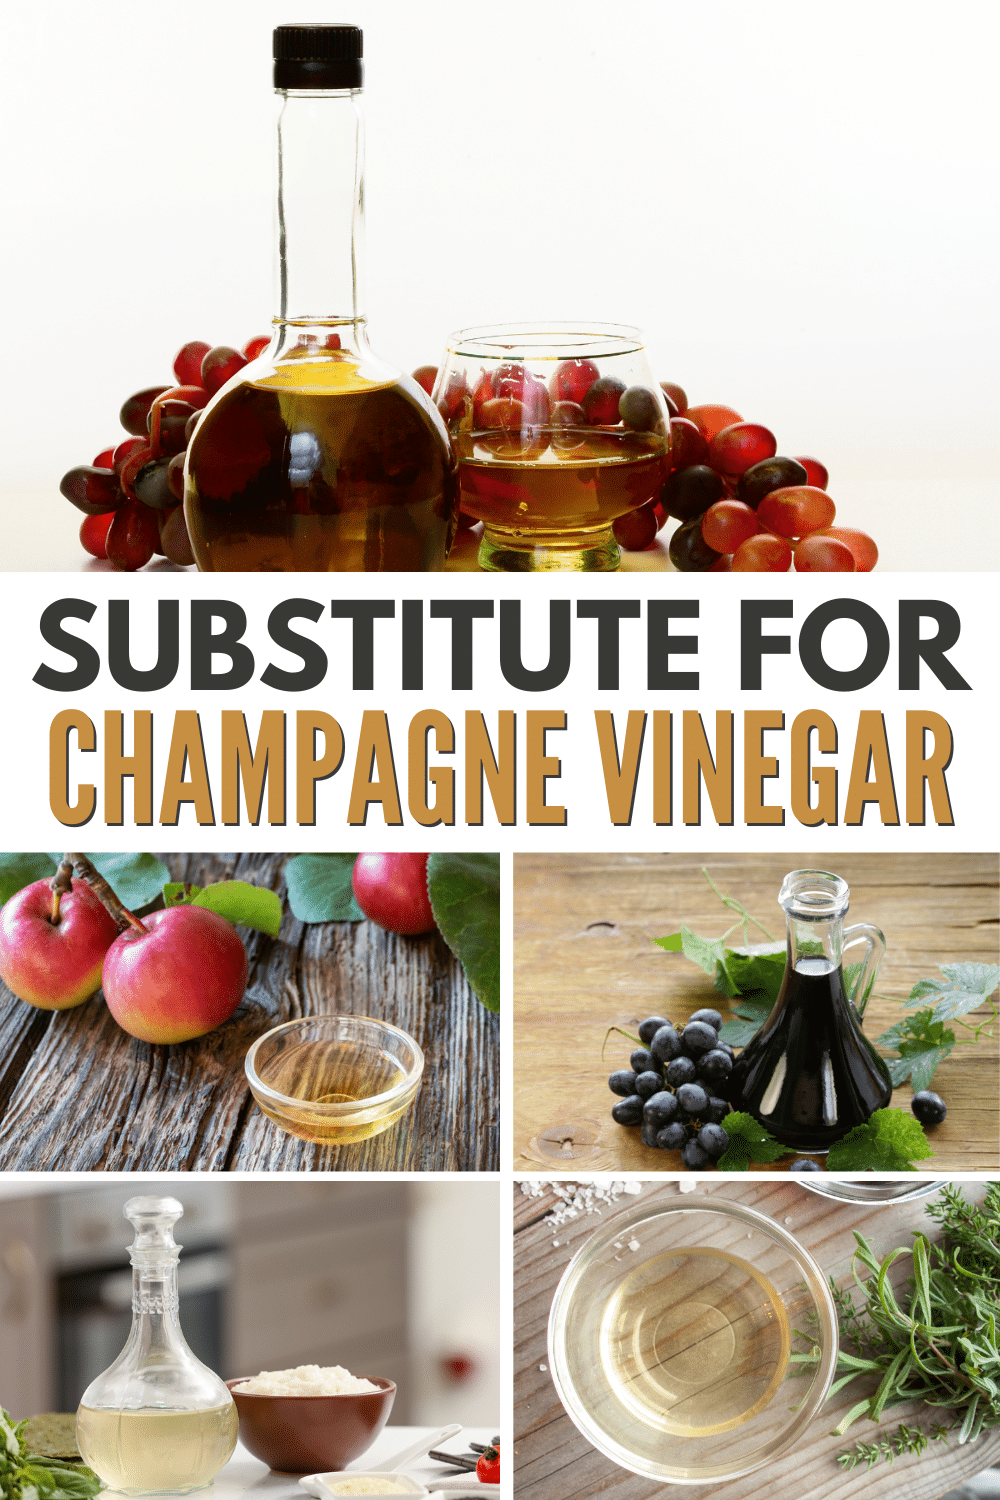 A collage of images illustrating substitute options for champagne vinegar.